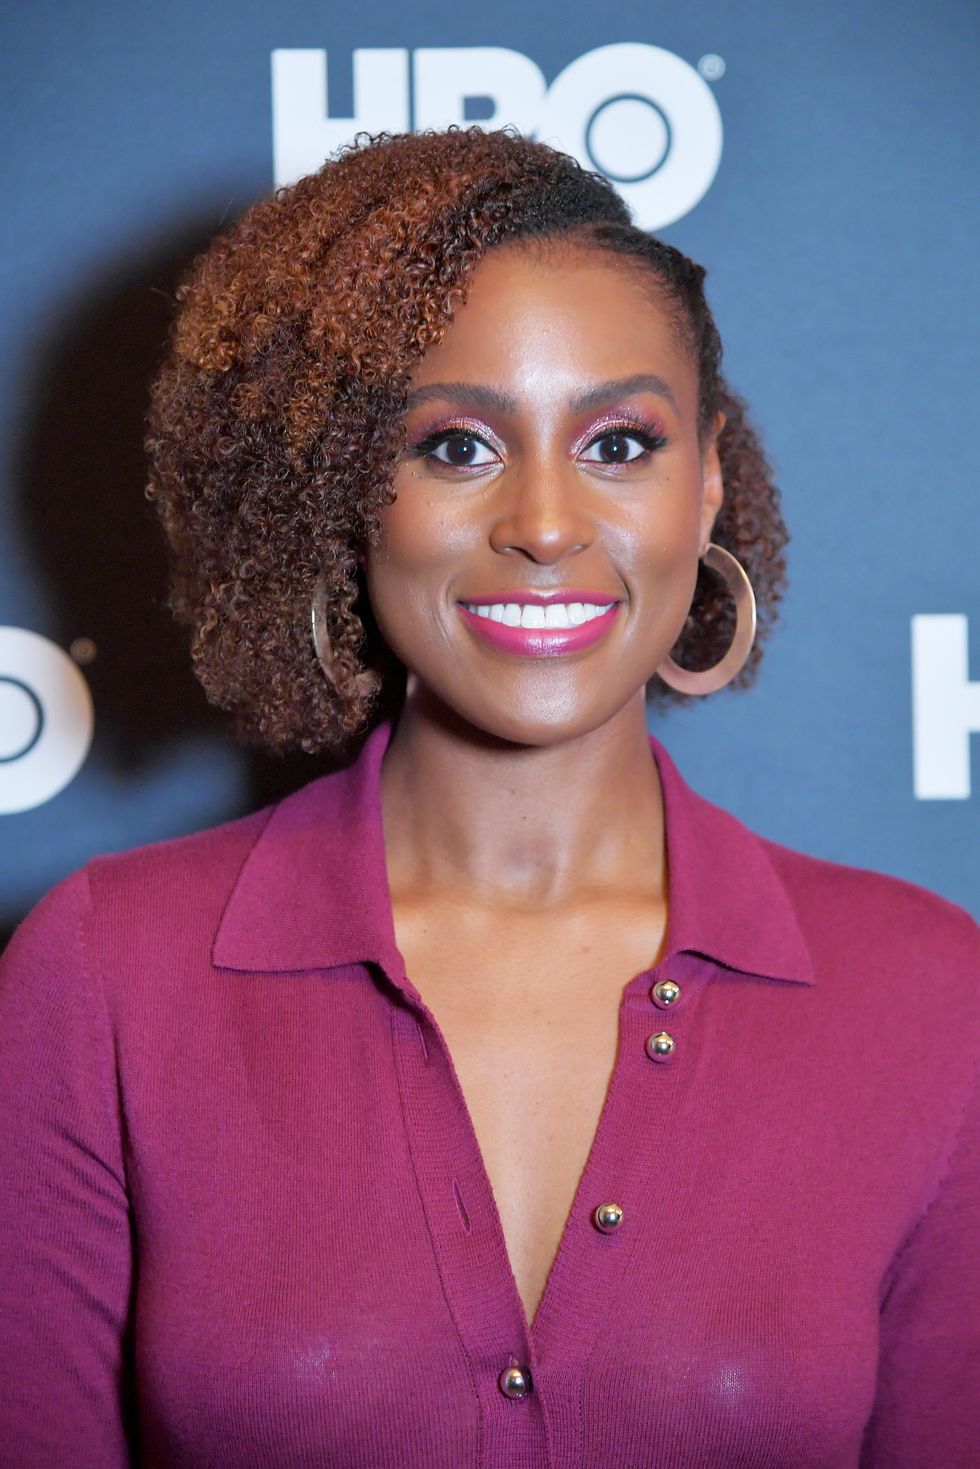 issa-rae-attends-the-herstory-presented-by-our-stories-to-news-photo-1585079958.jpg?crop=1xw:1xh;center,top&resize=980:*